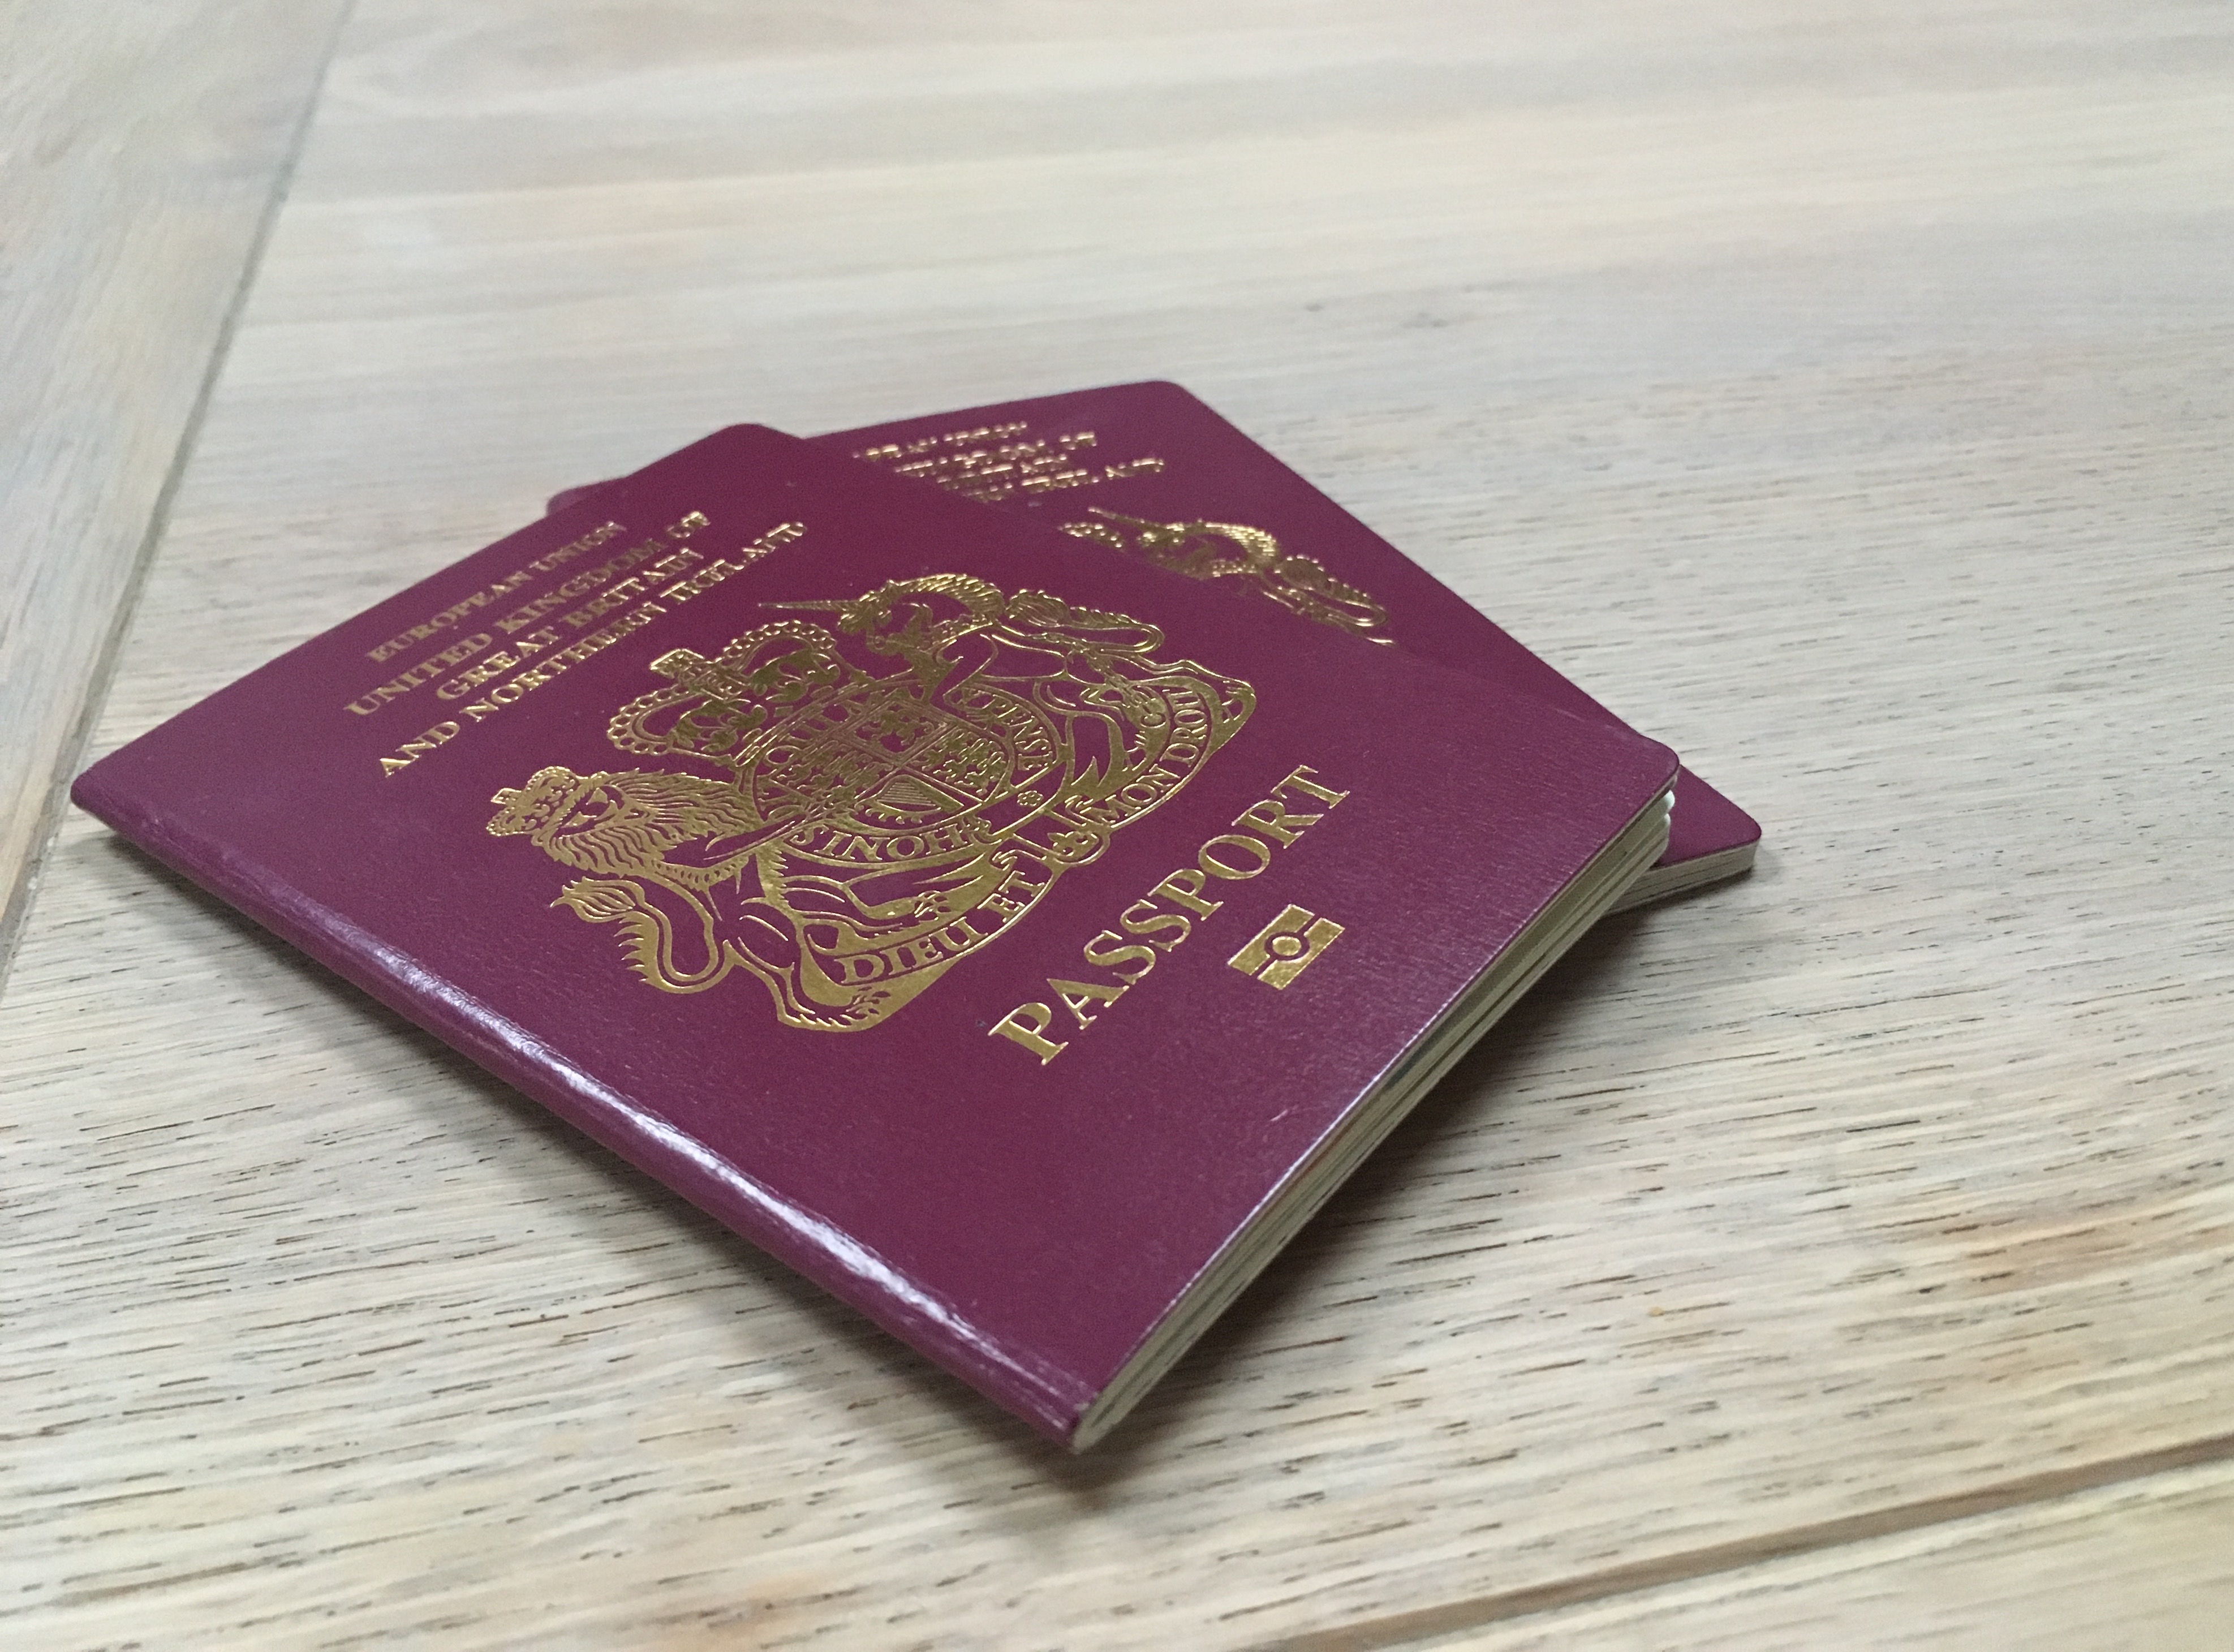 How to apply for a child passport